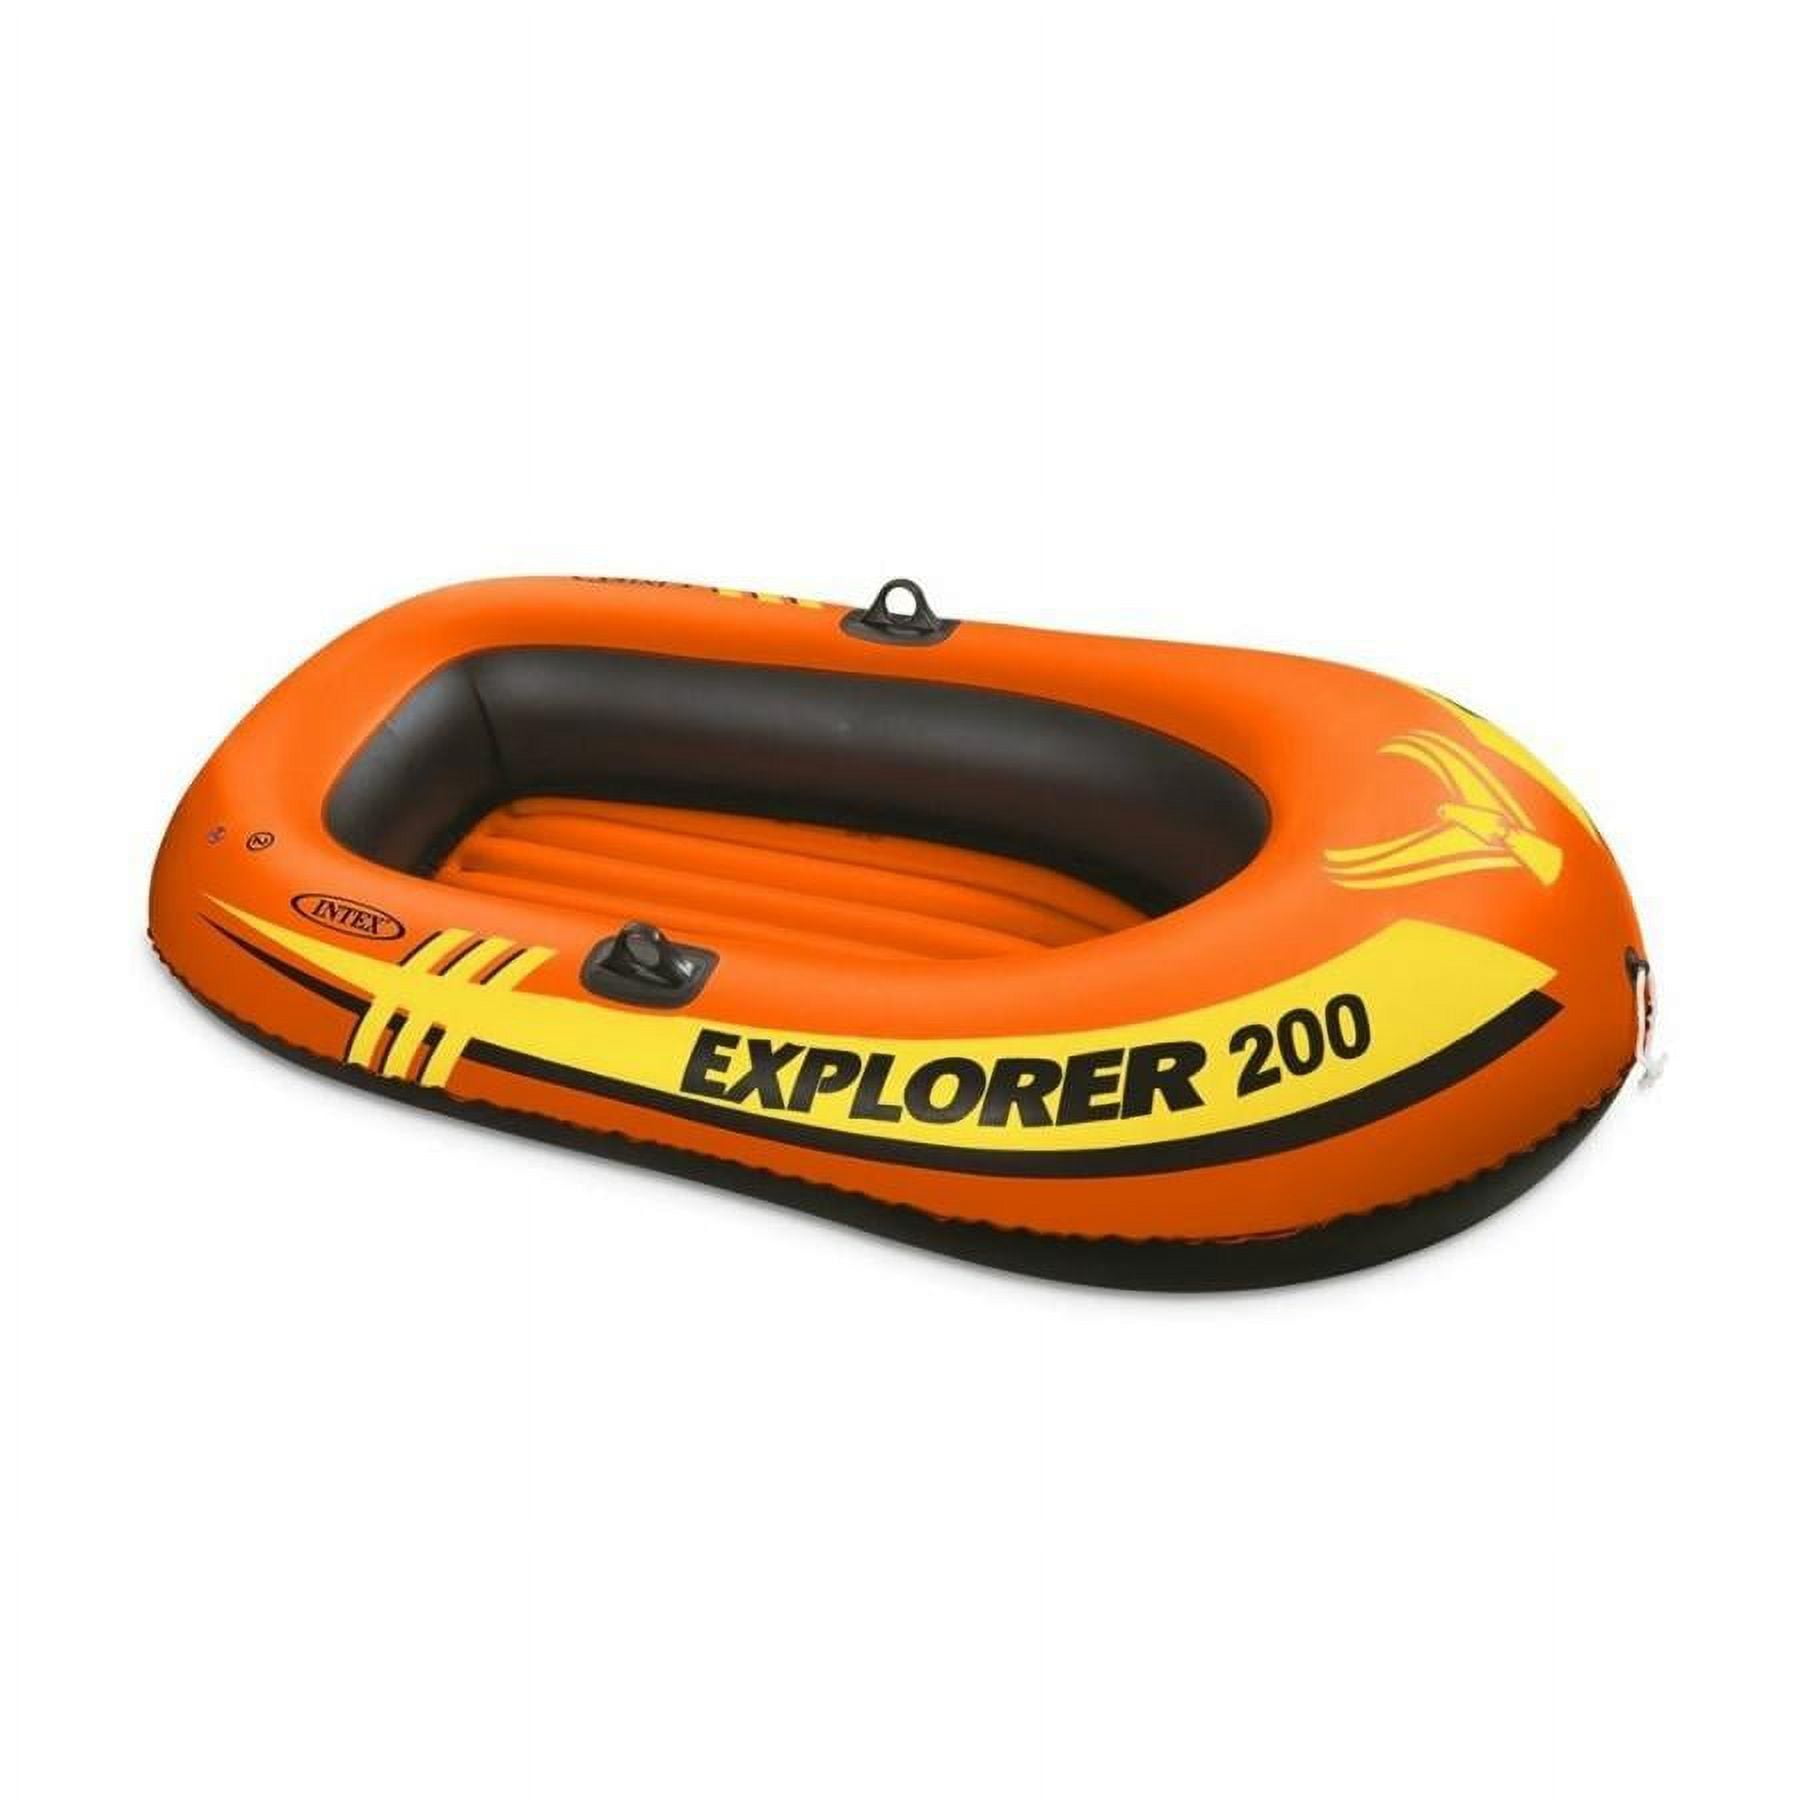 BRIS 12.5Ft Inflatable Boat Inflatable Fishing Rescue Dive Boat